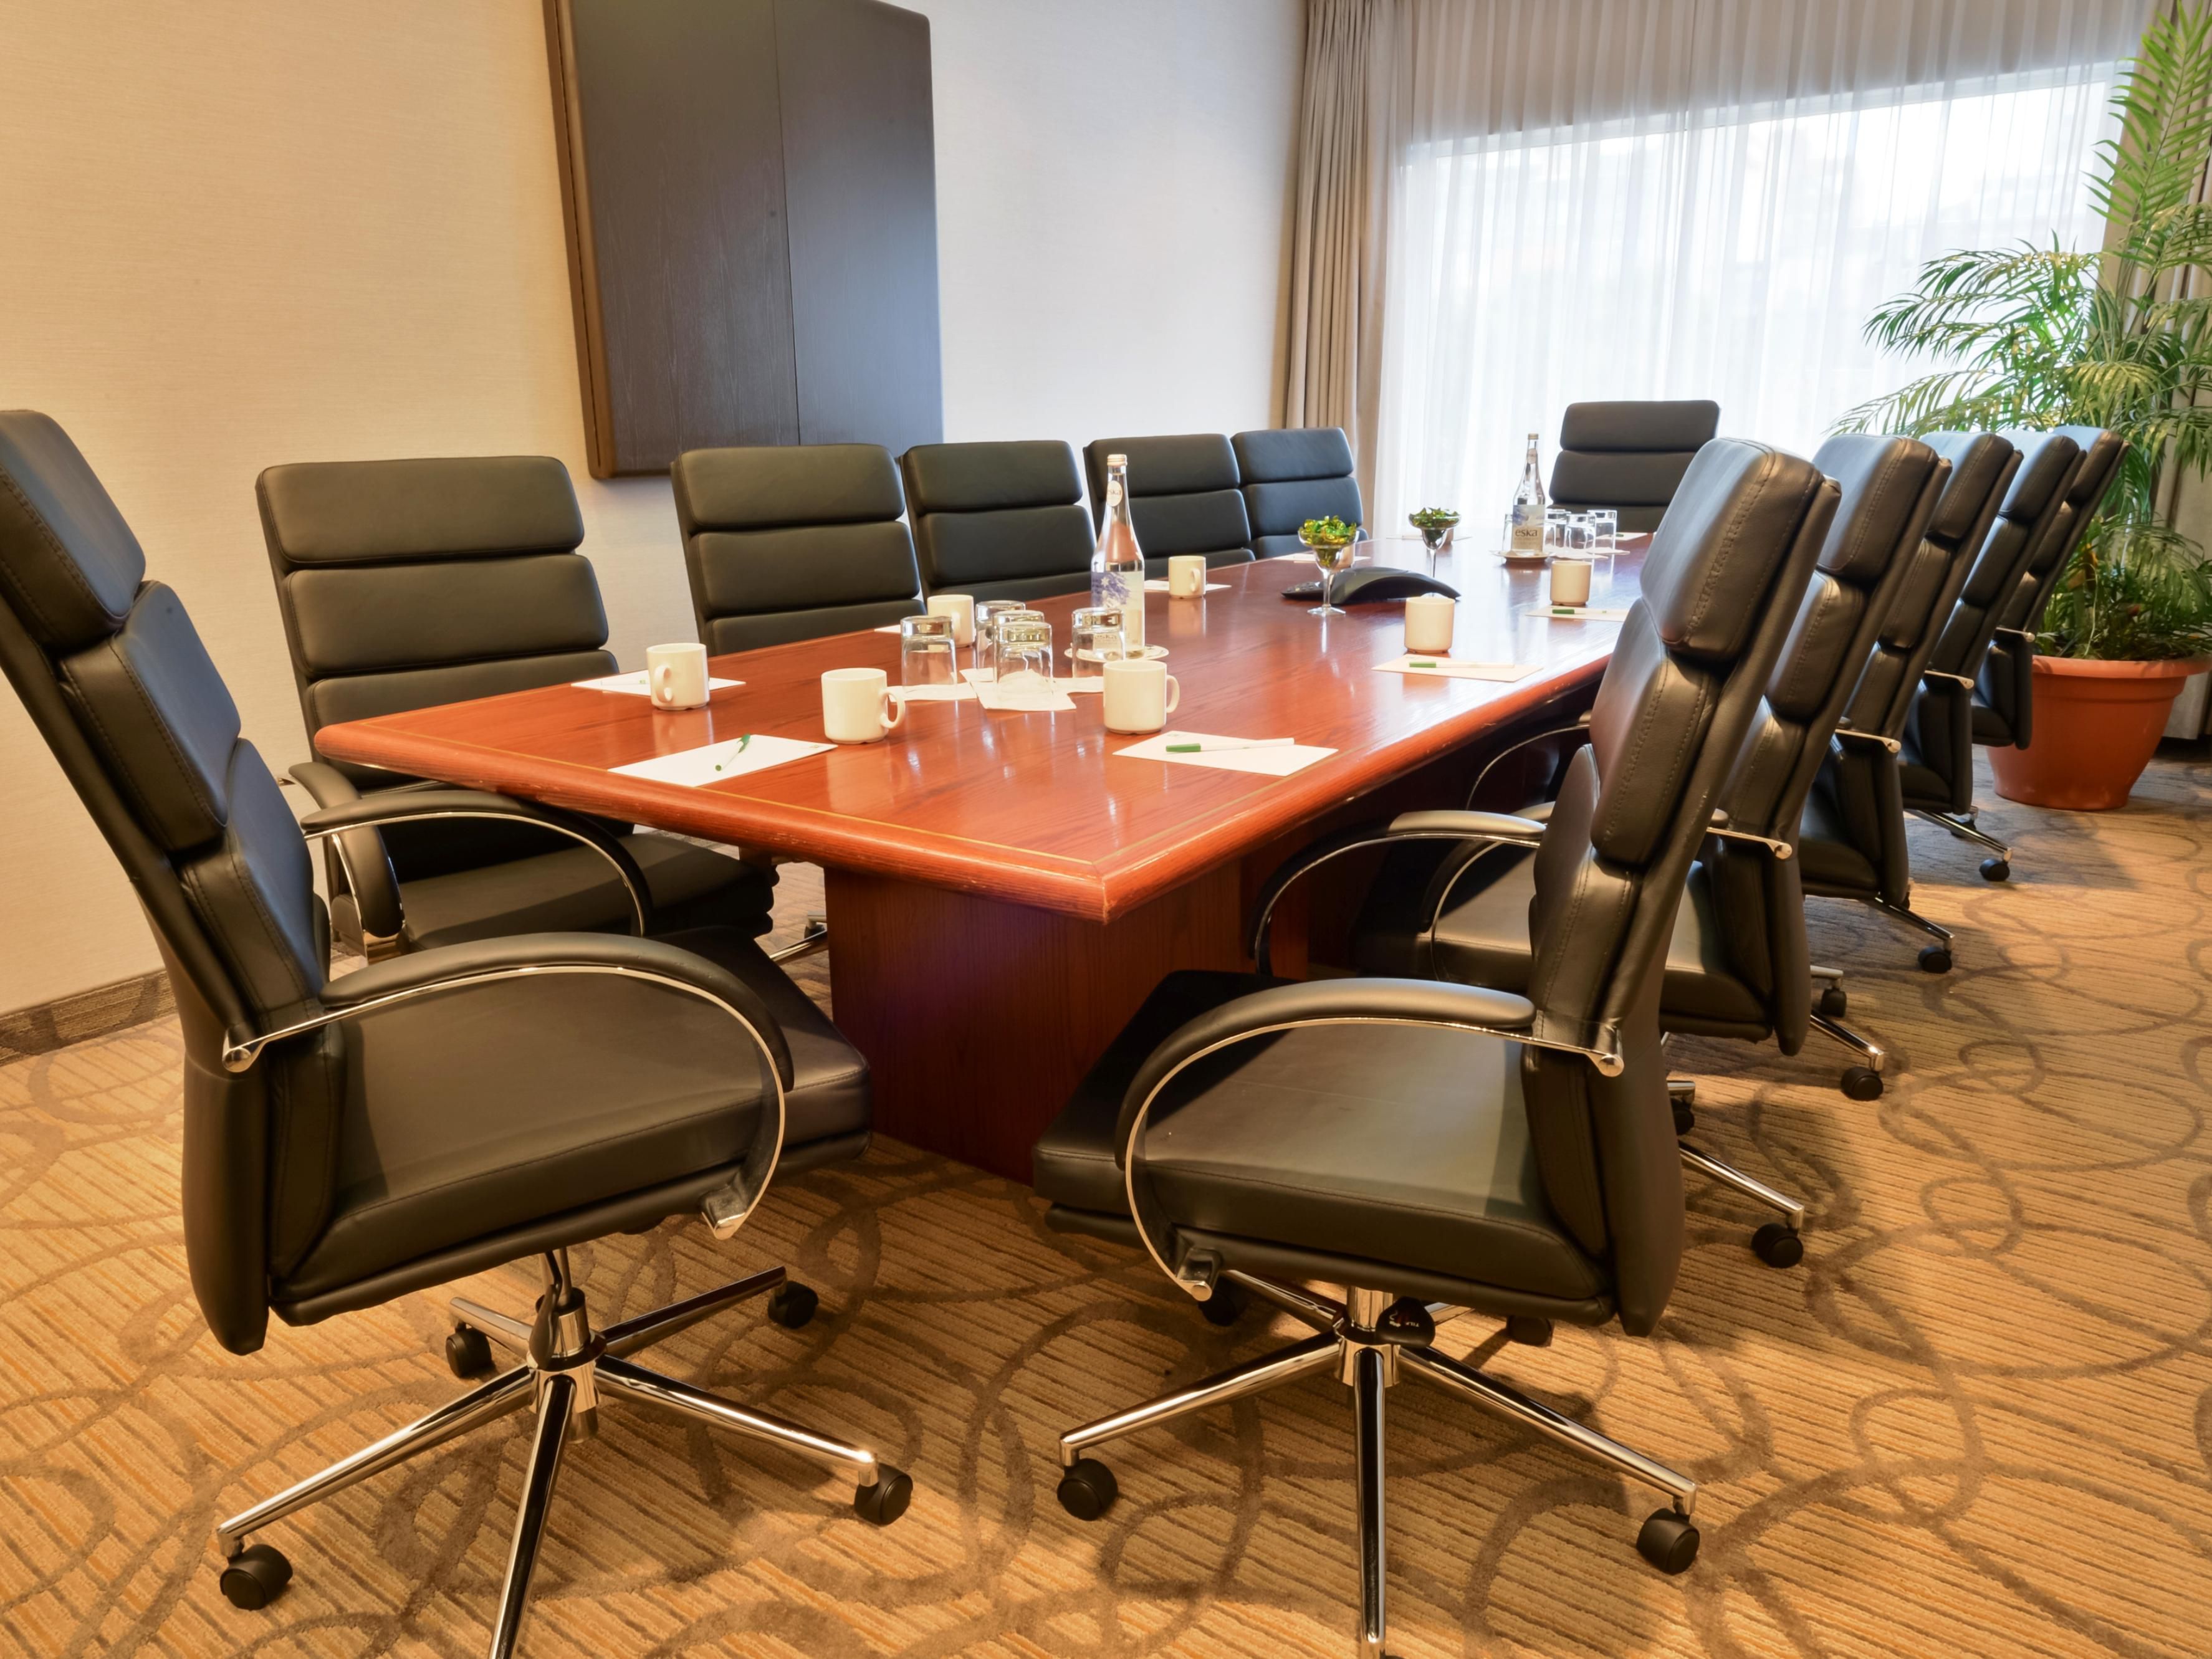 In town for corporate meetings or leisure gatherings? Our professional catering team is eager to welcome you and exceed your expectations. We offer an array of meeting rooms of all sizes of which 10 feature natural lighting.